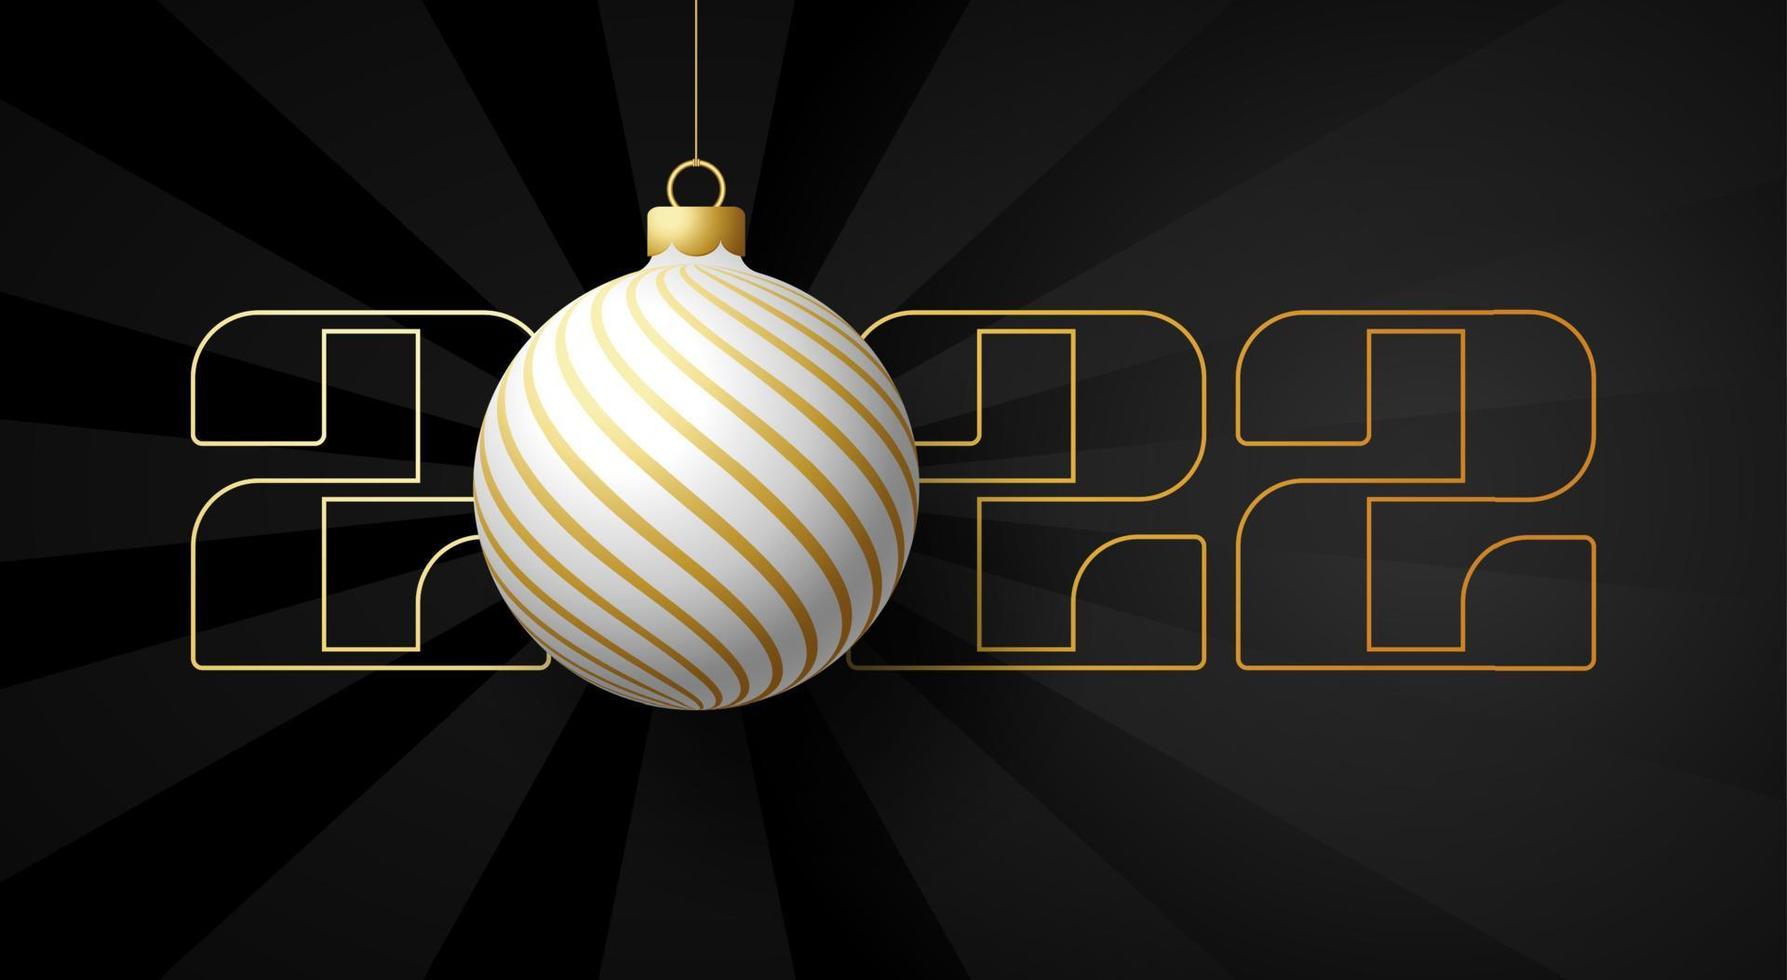 2022 Happy New Year. Luxury greeting card with a white and gold christmas tree ball on the royal black background. Vector illustration